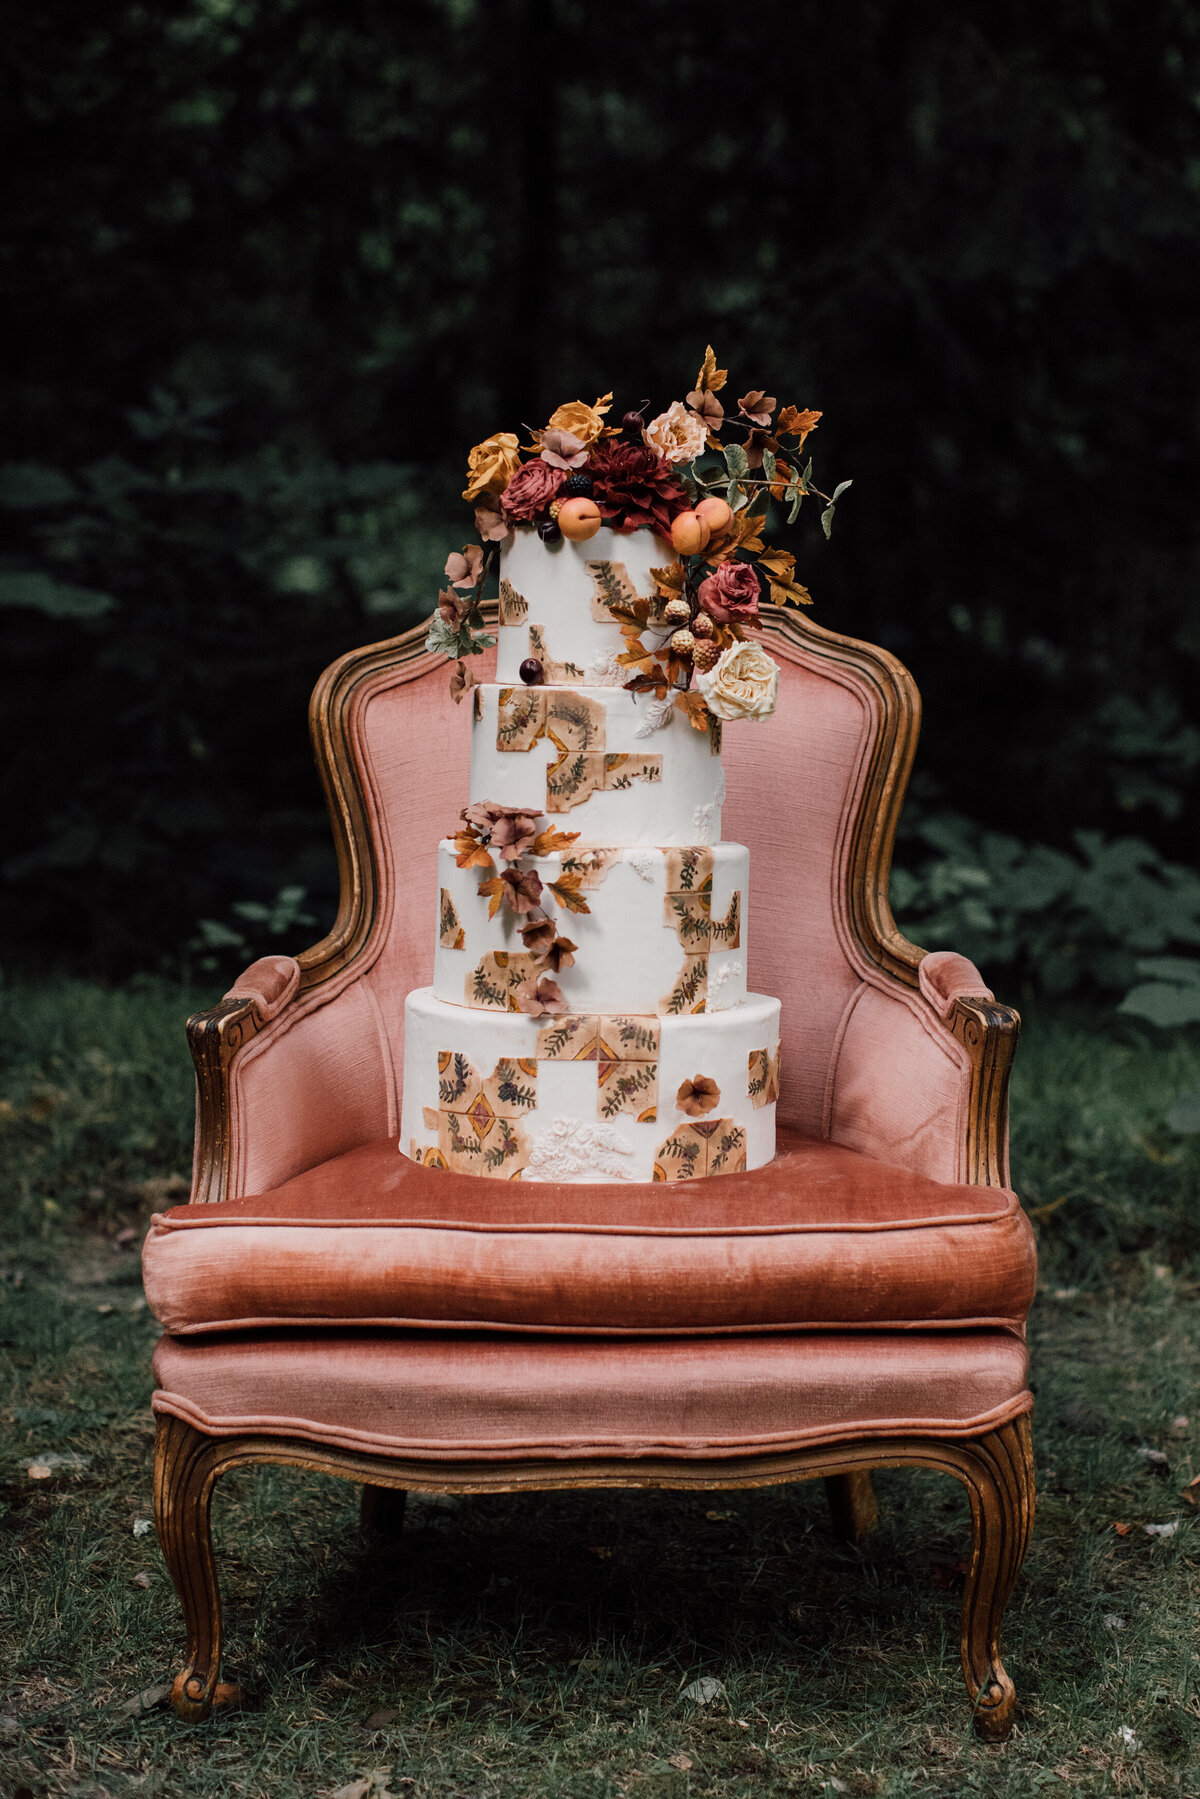 Four tiered bohemian wedding cake by Mamie Brougitte sitting on a peach velvet chair